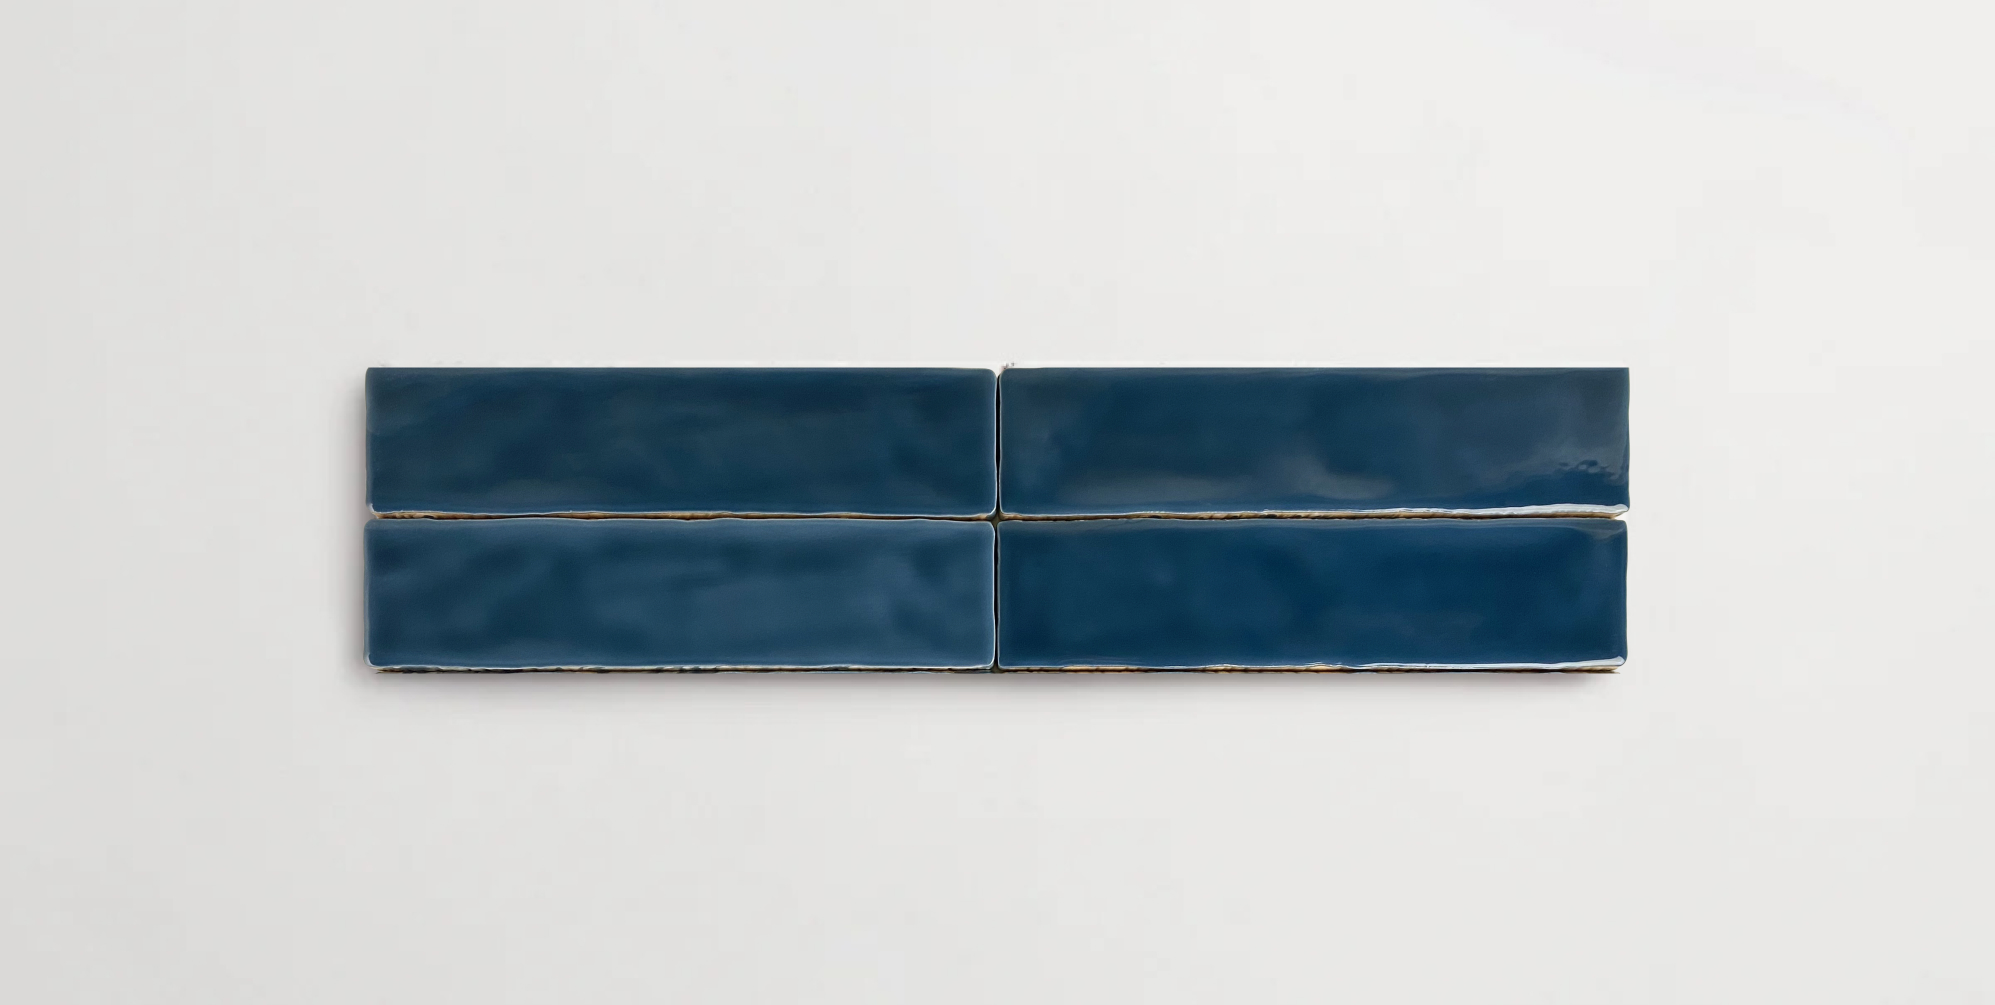 Four stacked 2" x 10" dark blue ceramic tiles in a glossy finish